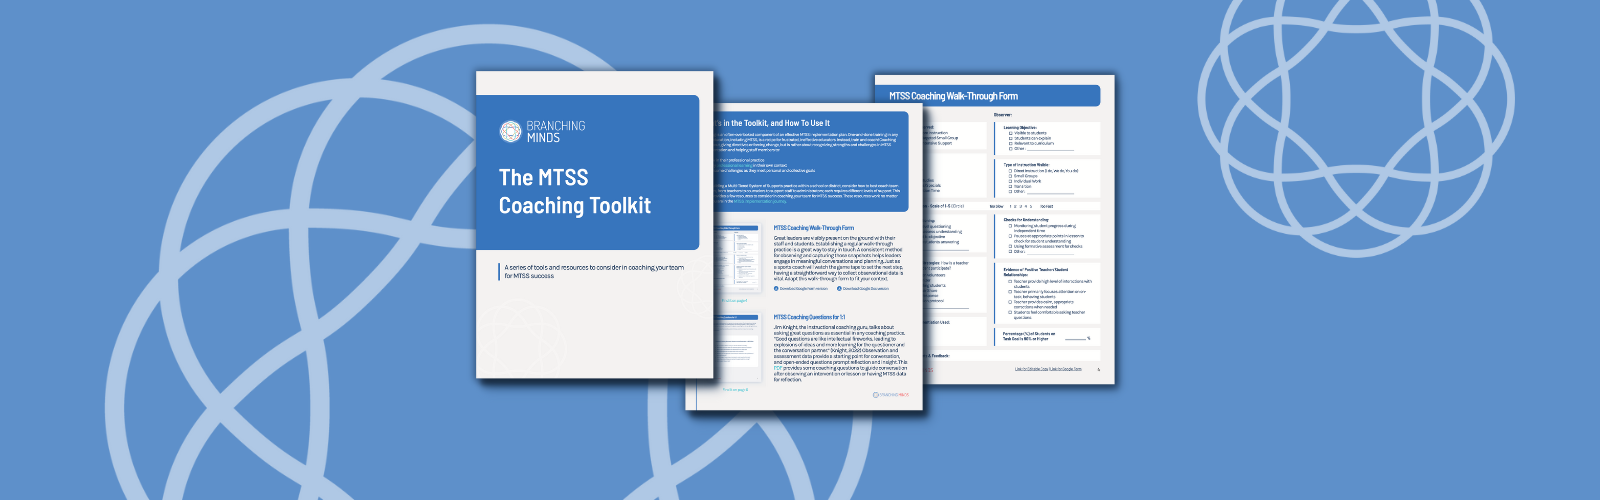 The MTSS Coaching Toolkit